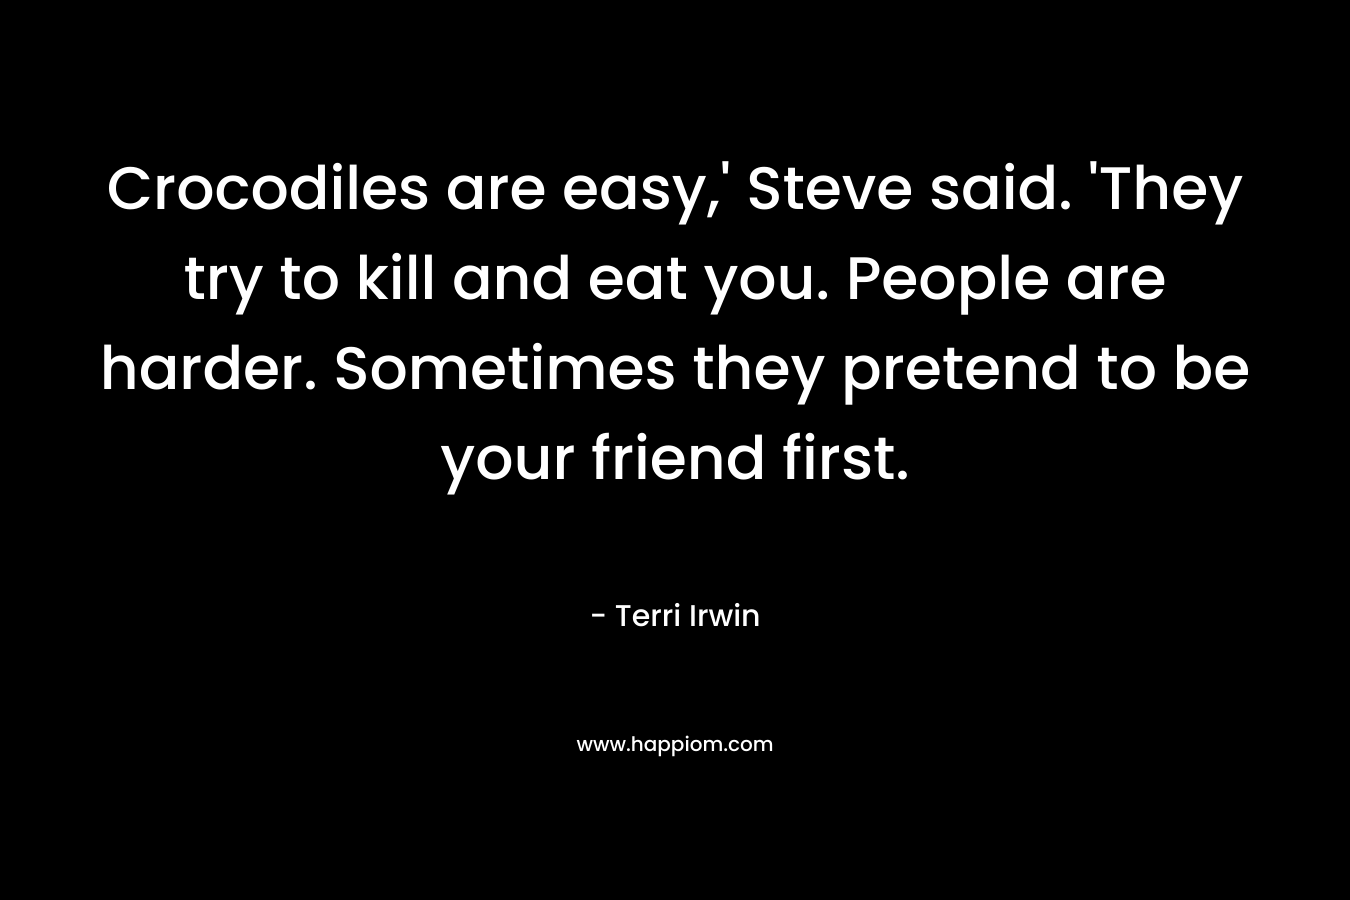 Crocodiles are easy,’ Steve said. ‘They try to kill and eat you. People are harder. Sometimes they pretend to be your friend first. – Terri Irwin